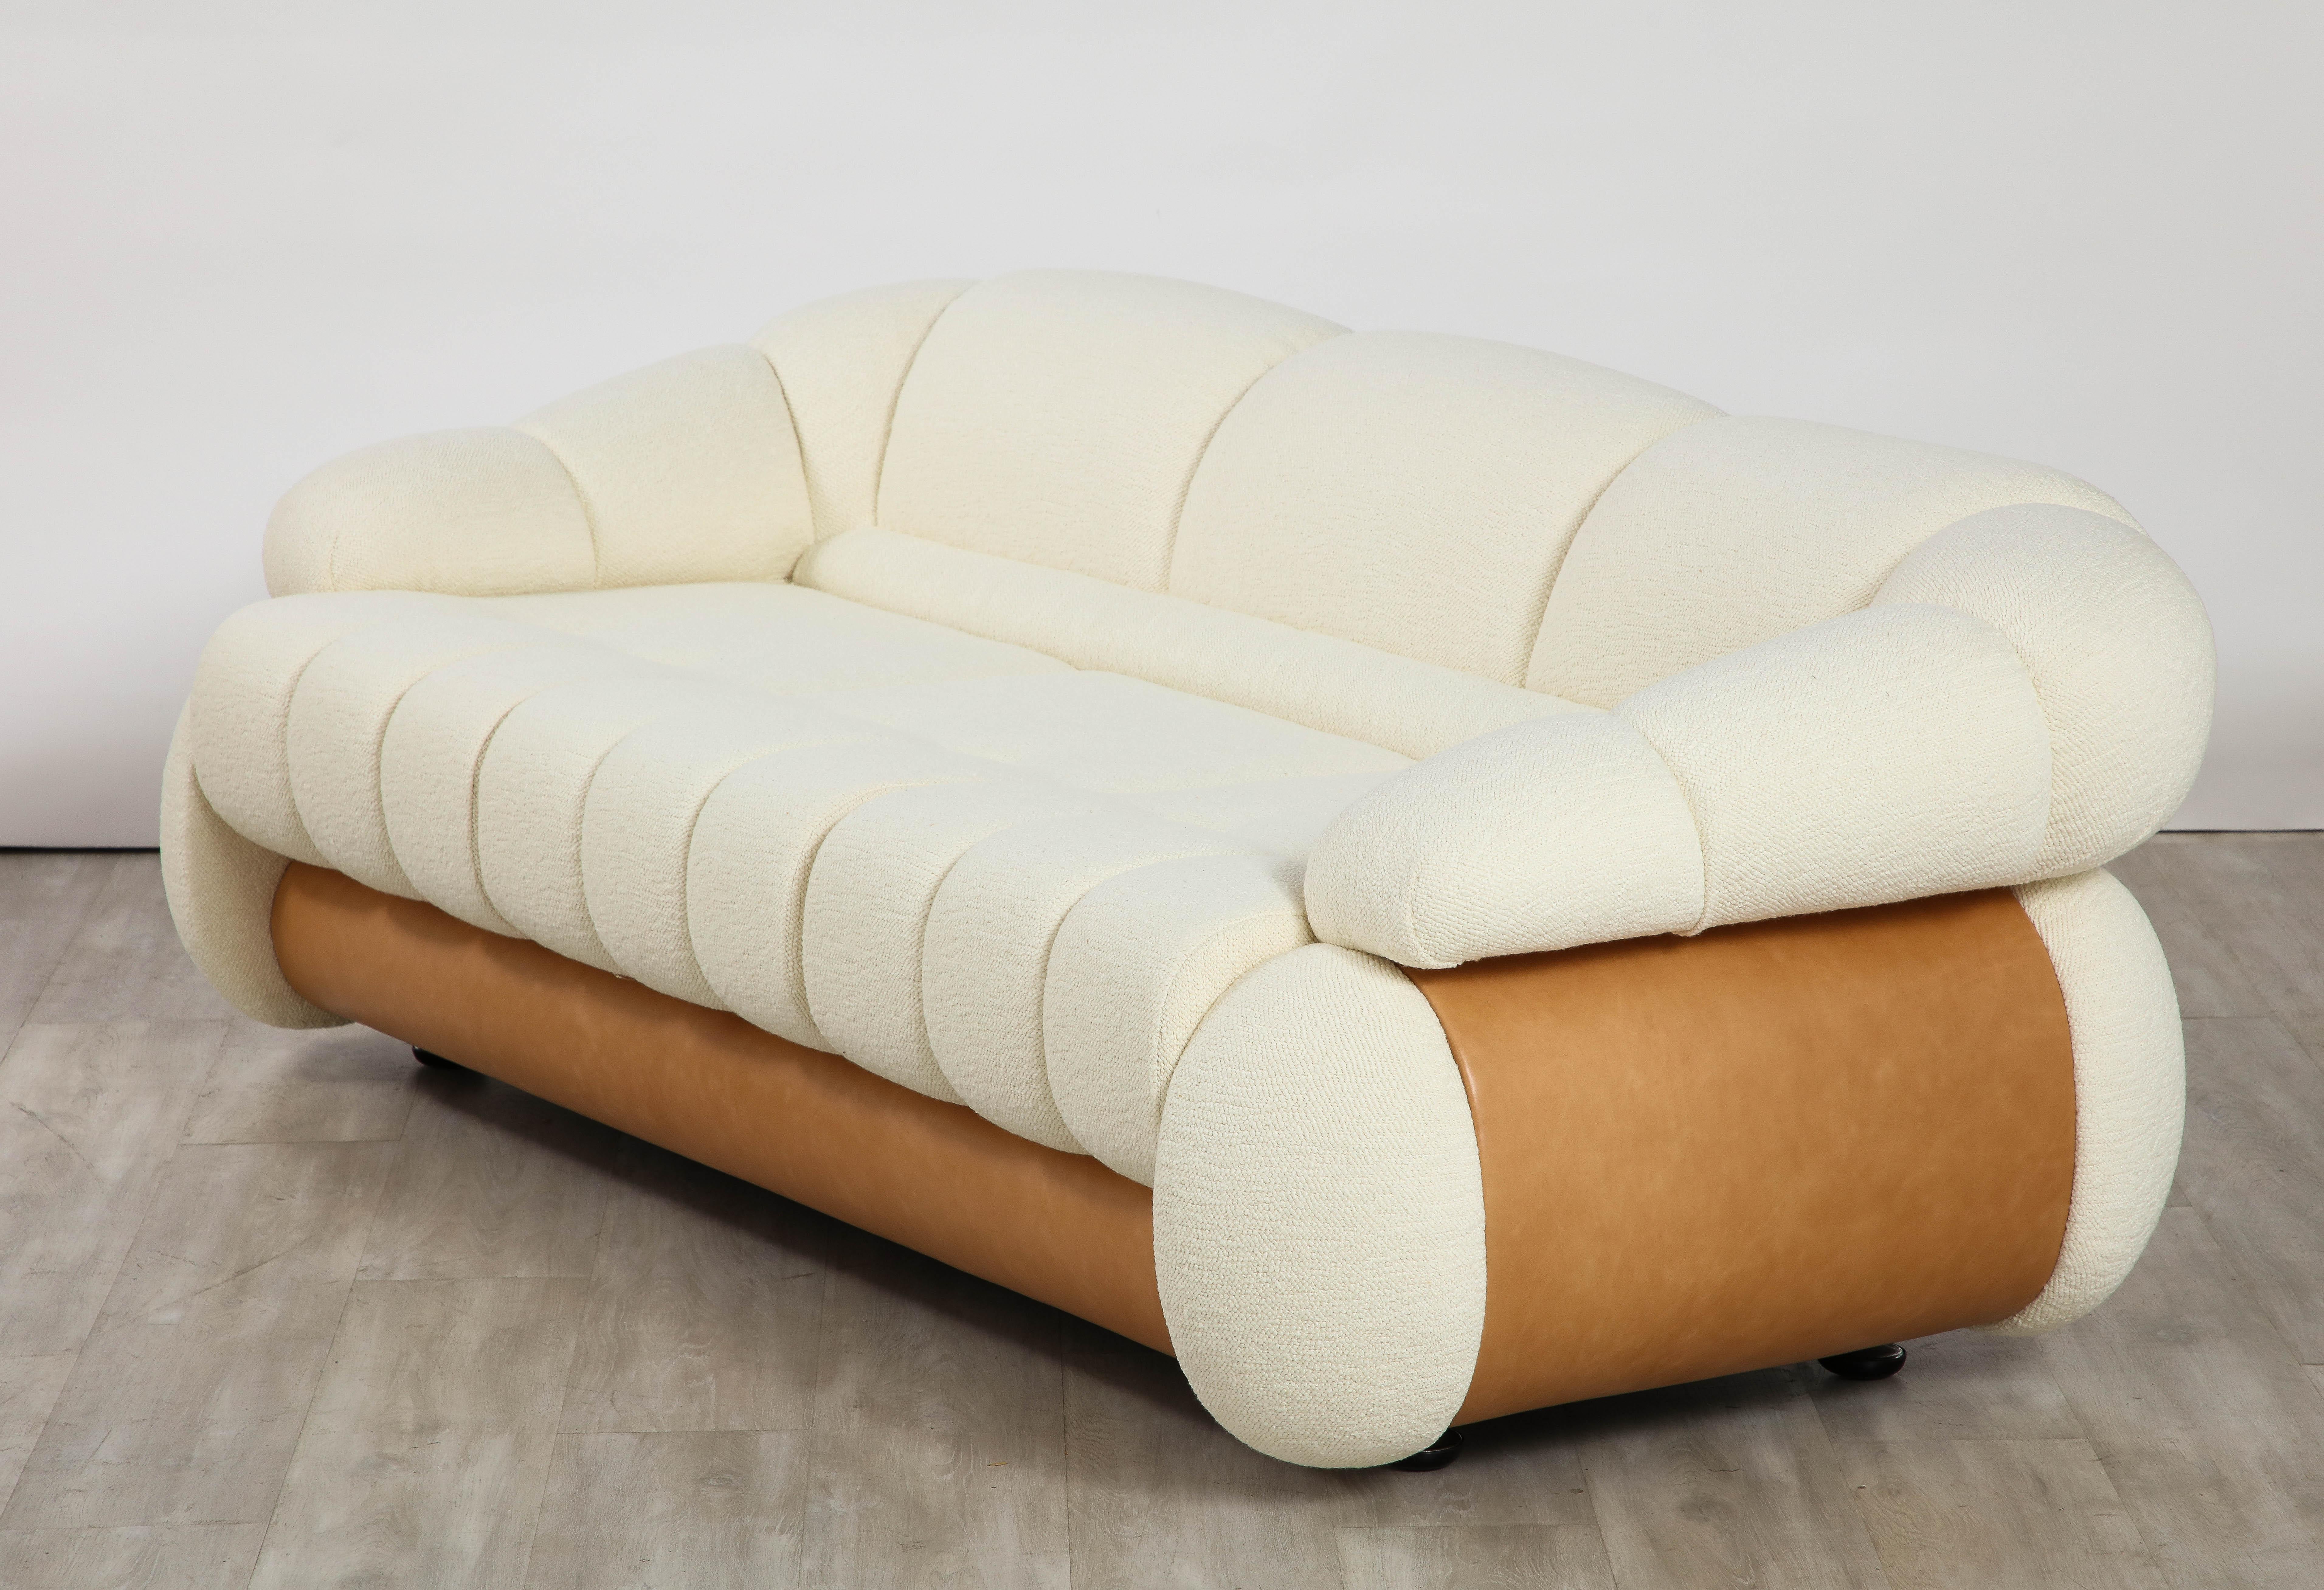 Adriano Piazzesi Italian 1970's Channel Tufted Sofa For Sale 7